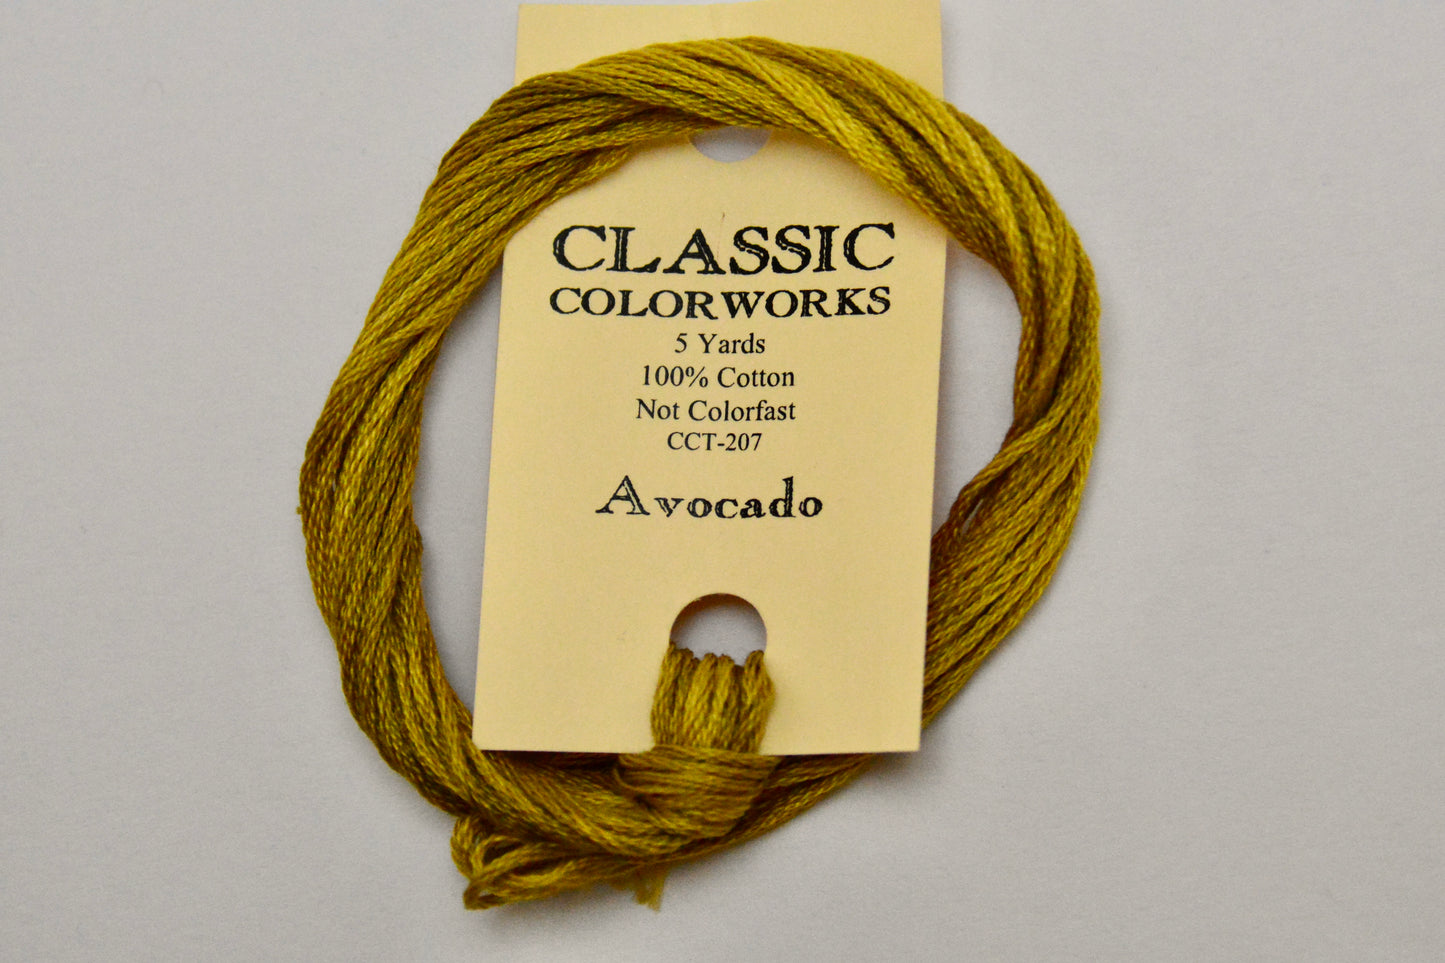 Avocado Classic Colorworks 6 Strand Hand-Dyed Embroidery Floss